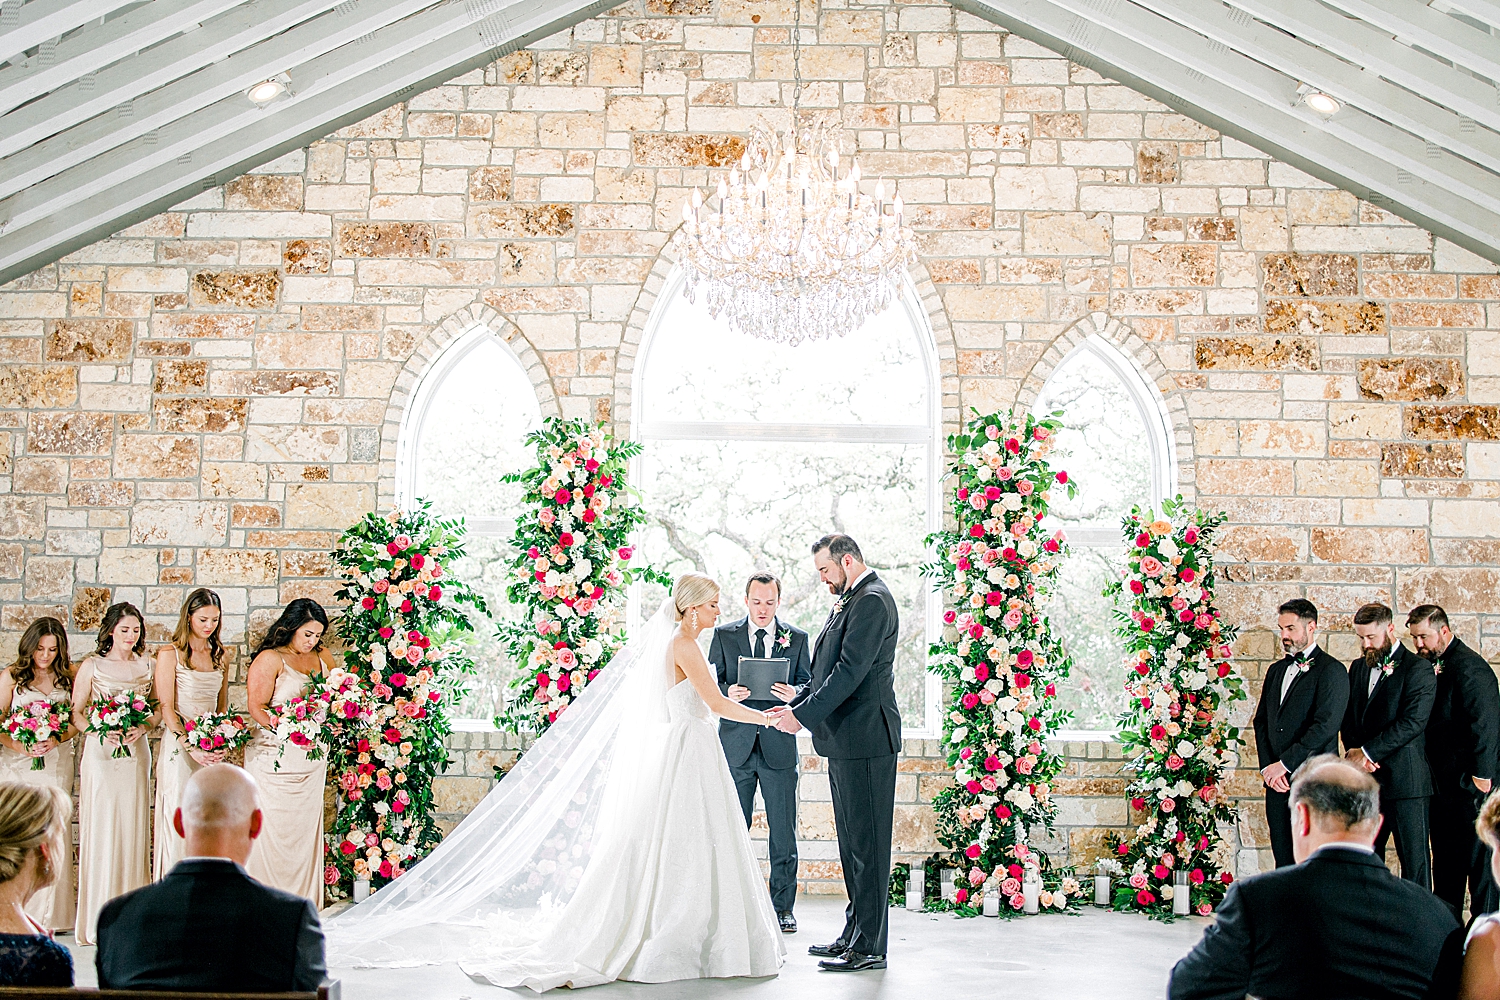 Romantic Spring Wedding Day at The Chandelier of Gruene | Reiley and Rose | Central Texas Floral Designer | wedding florals, pink wedding inspiration, floral installations, wedding floral install | via reileyandrose.com